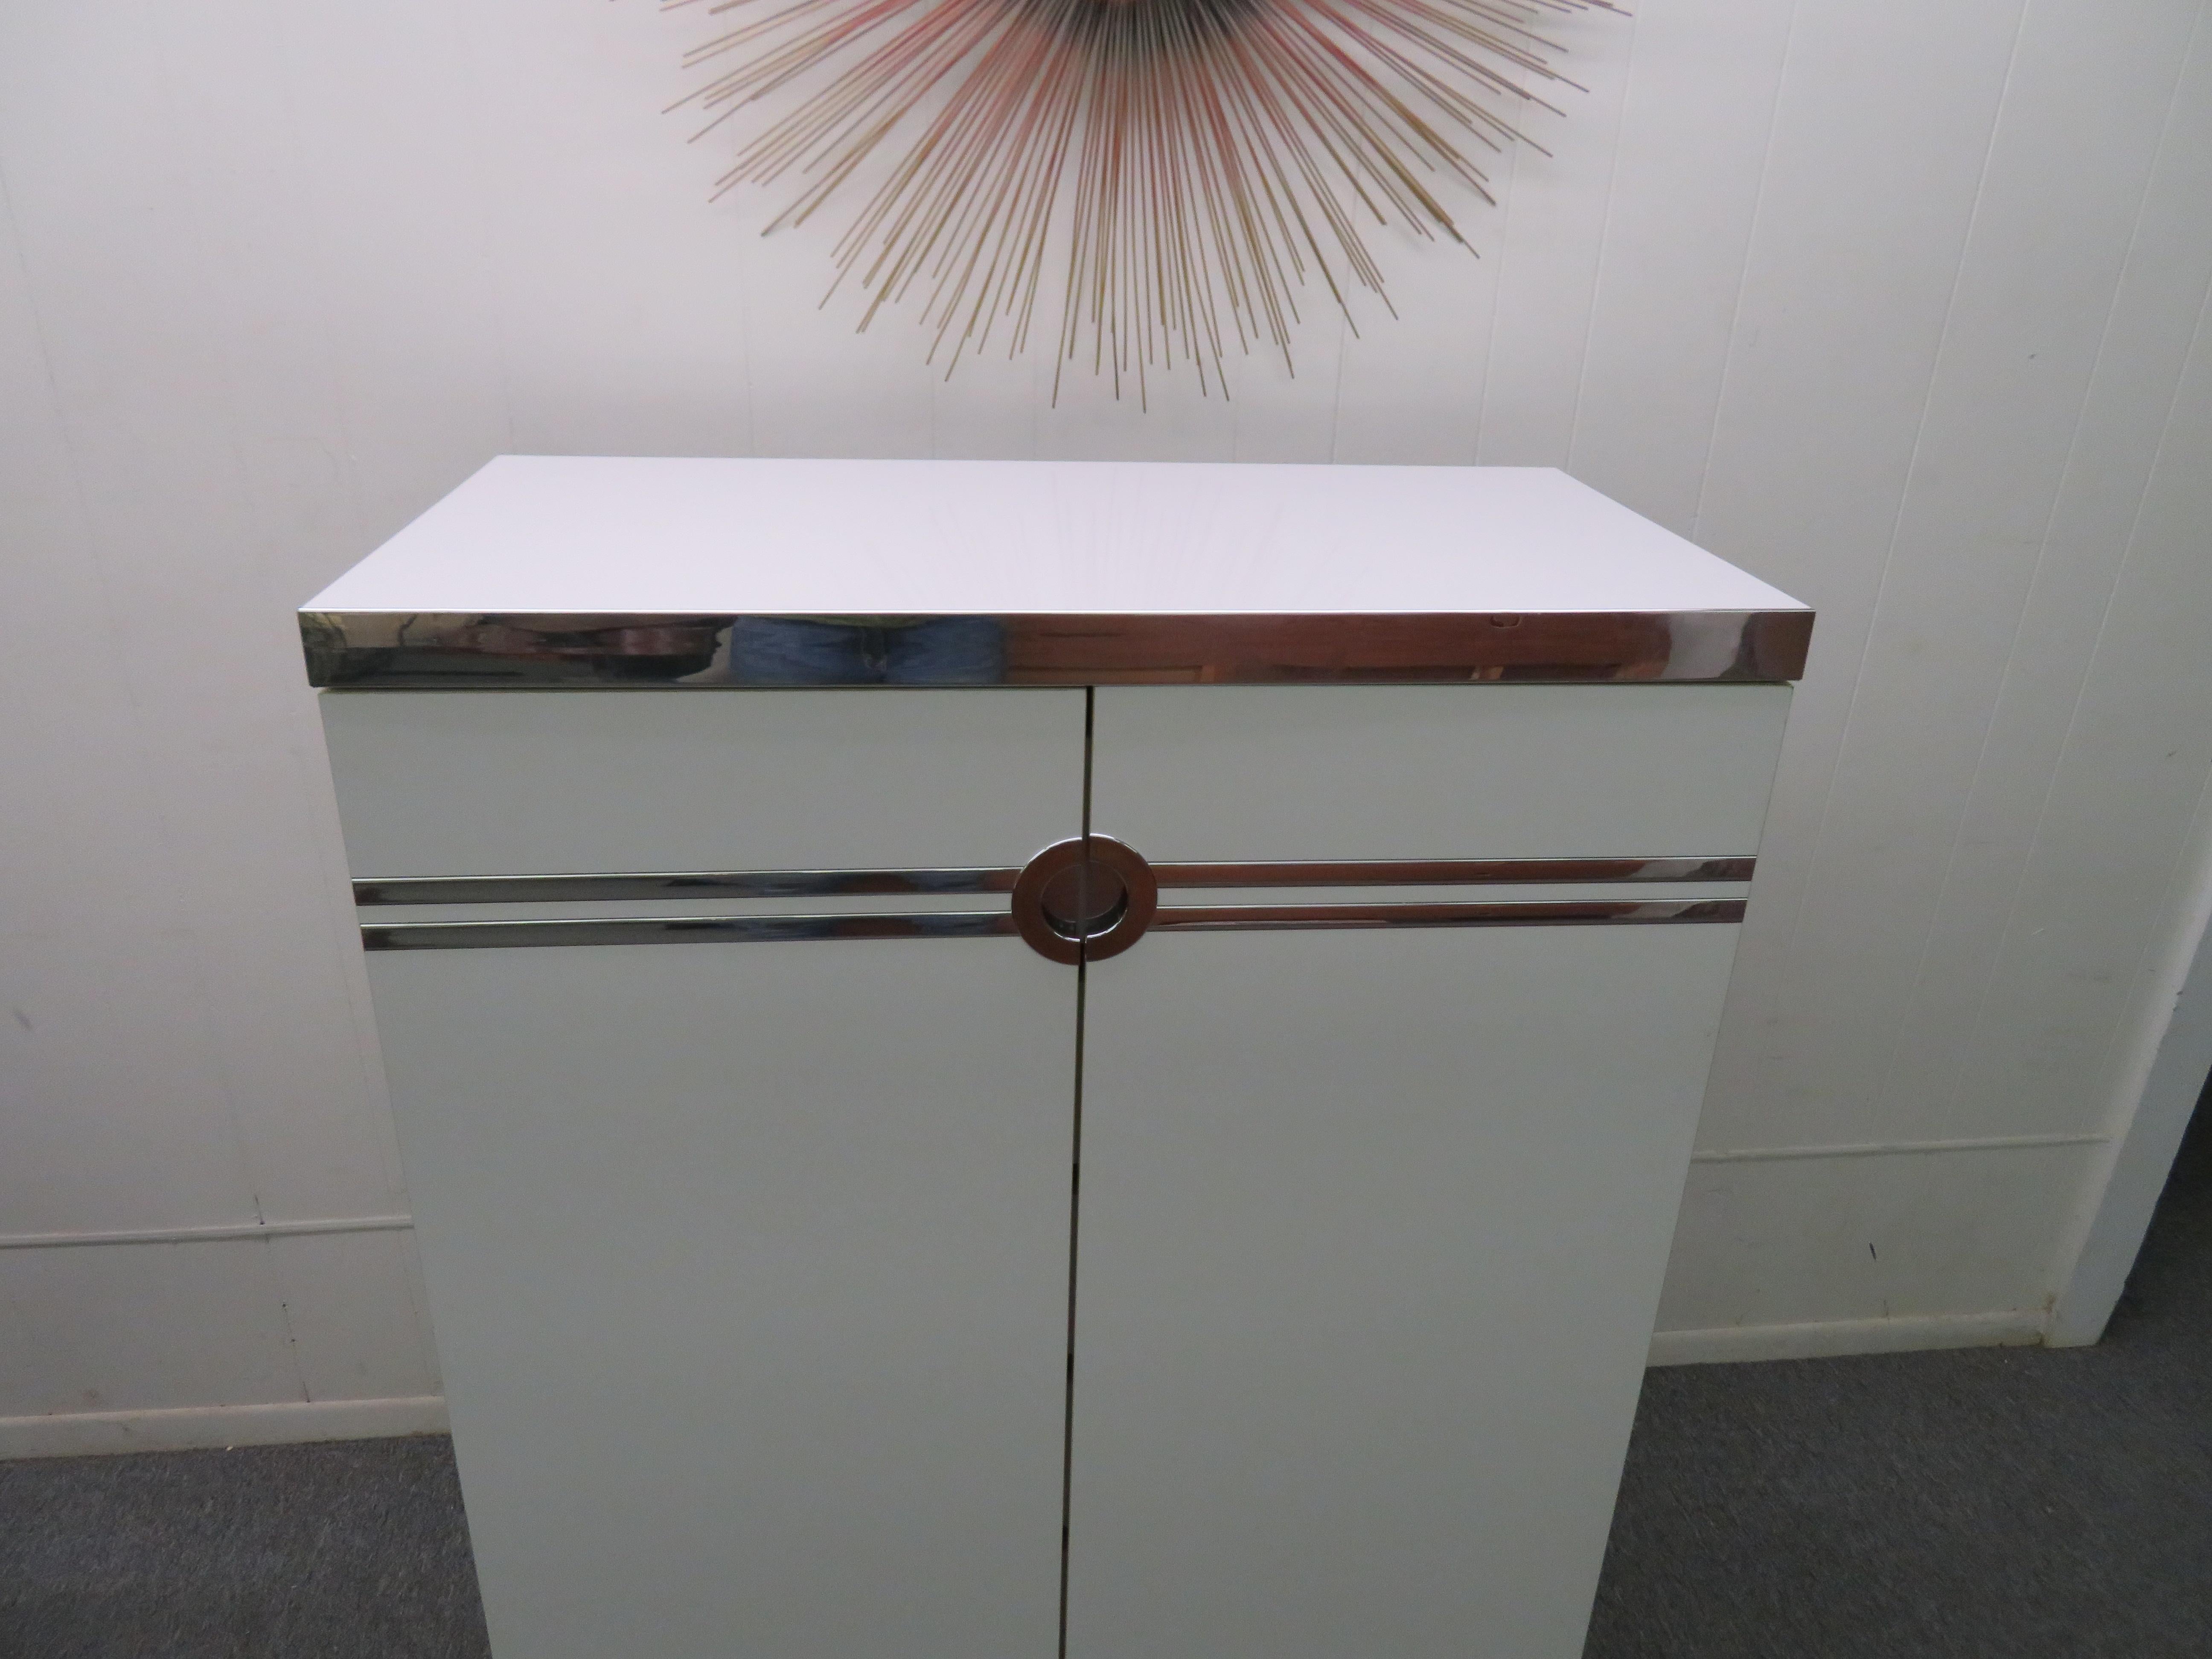 Stylish Pierre Cardin highboy or tall chest of drawers made in formica, wood, aluminium and chrome-plated accents. Simple, sleek chest of drawers in a two-door cabinet designed by Pierre Cardin for Dilingham.